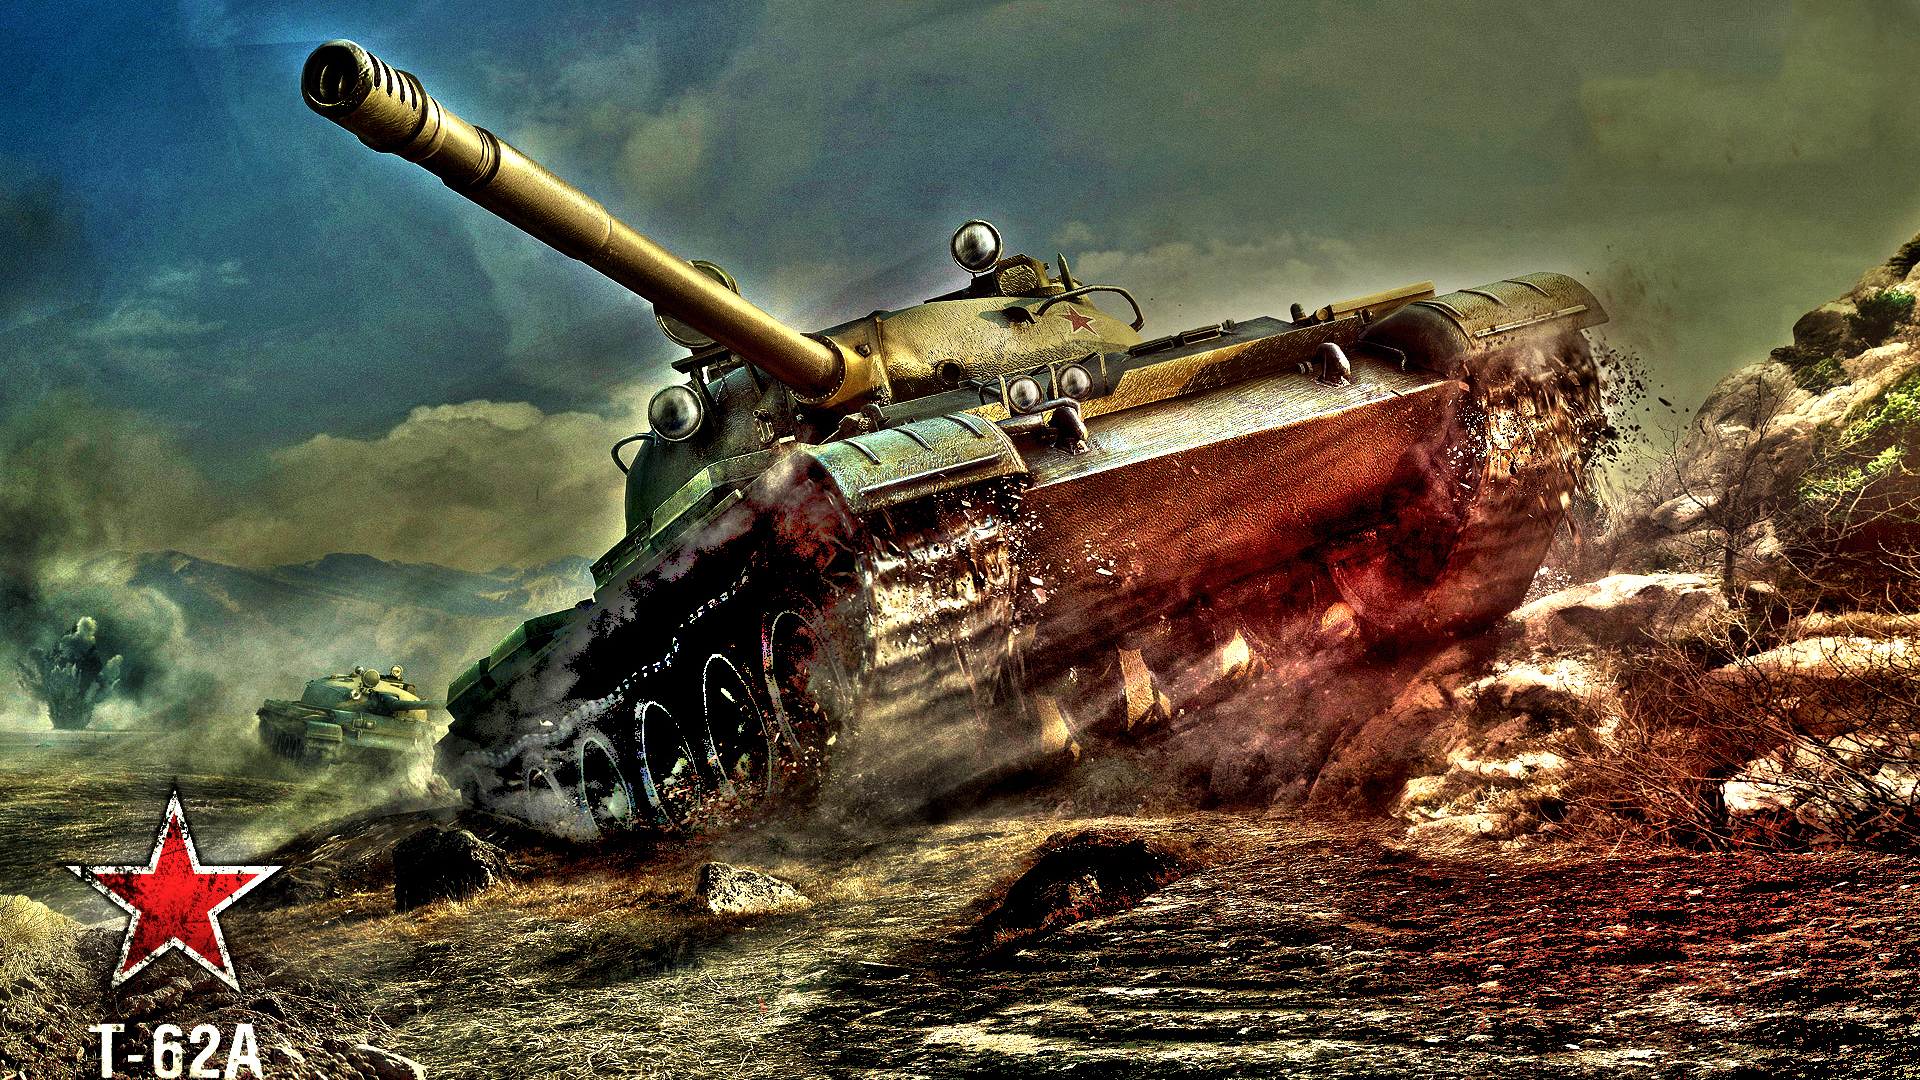 World of War Tanks download the new